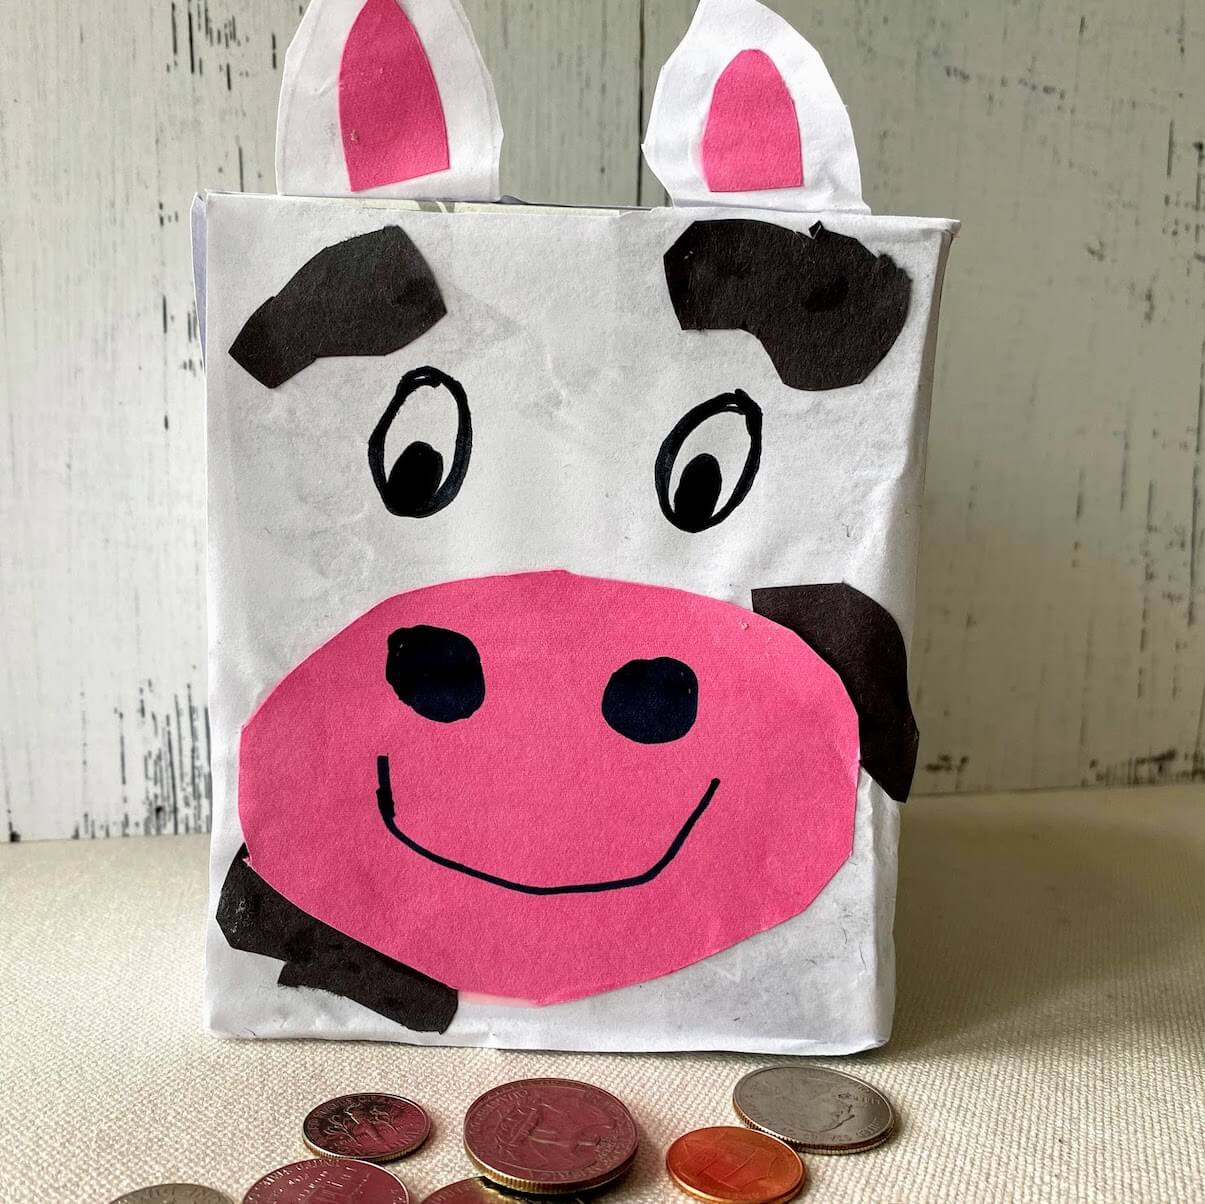 Cute Tissue Box Cow Craft Activity For Preschoolers